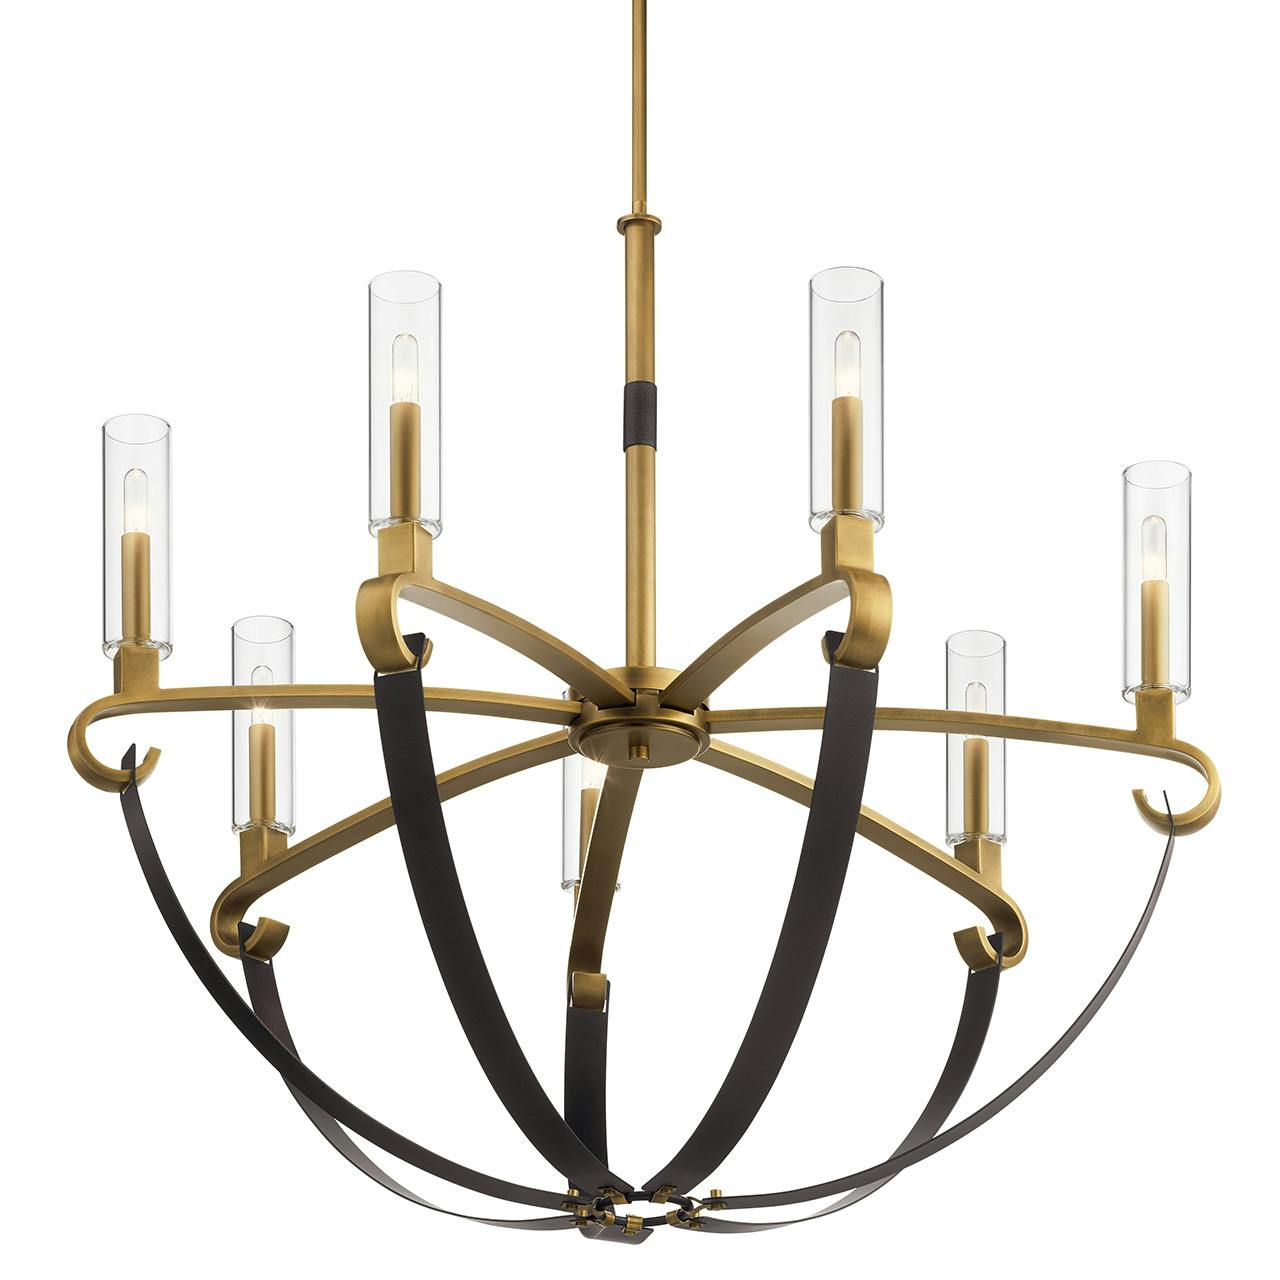 Artem 34" Chandelier Natural Brass without the canopy on a white background